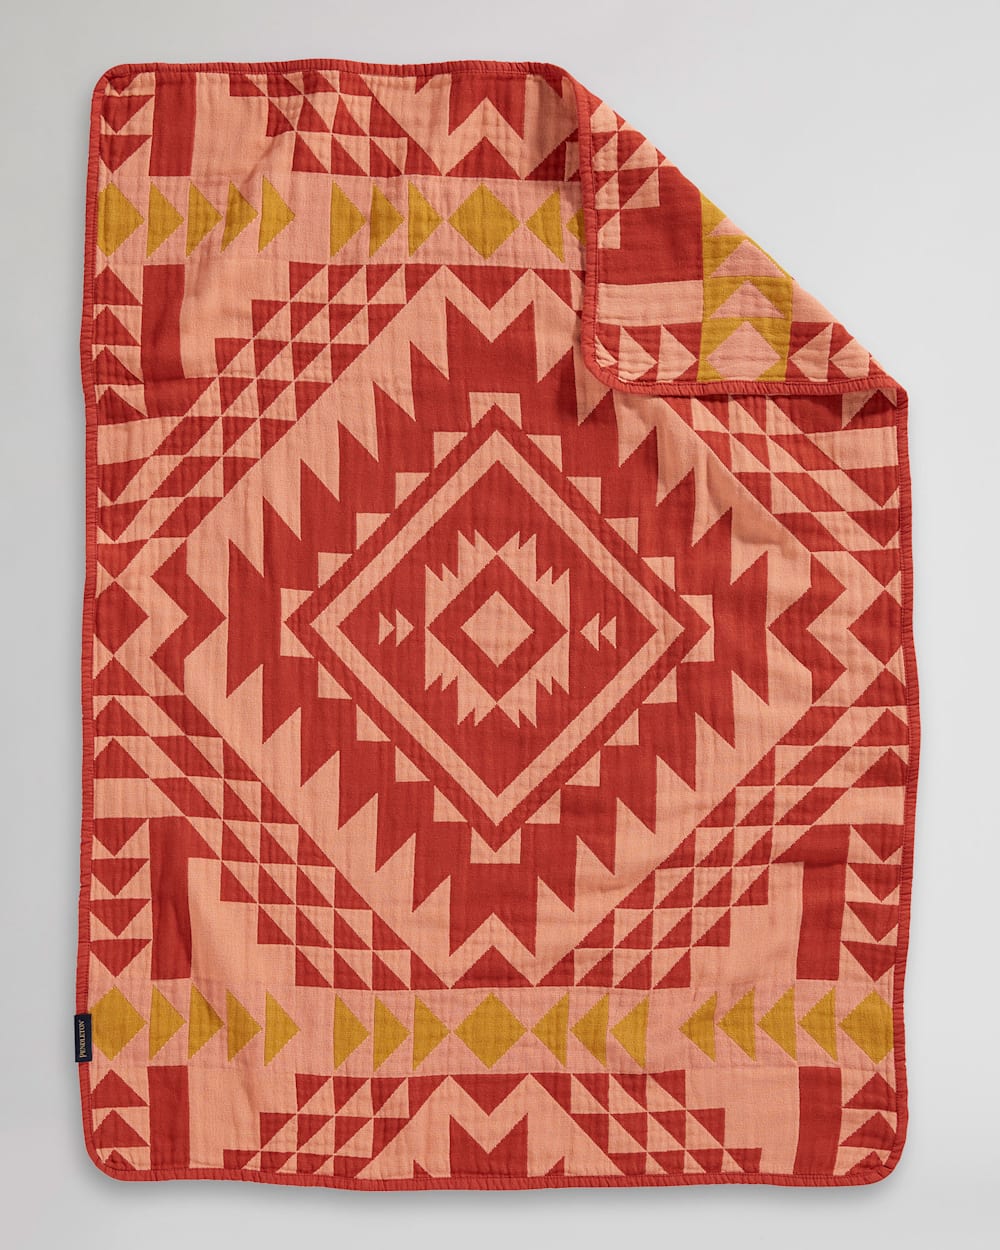 ALTERNATE VIEW OF SMITH ROCK ORGANIC COTTON BABY BLANKET IN CLAY image number 2